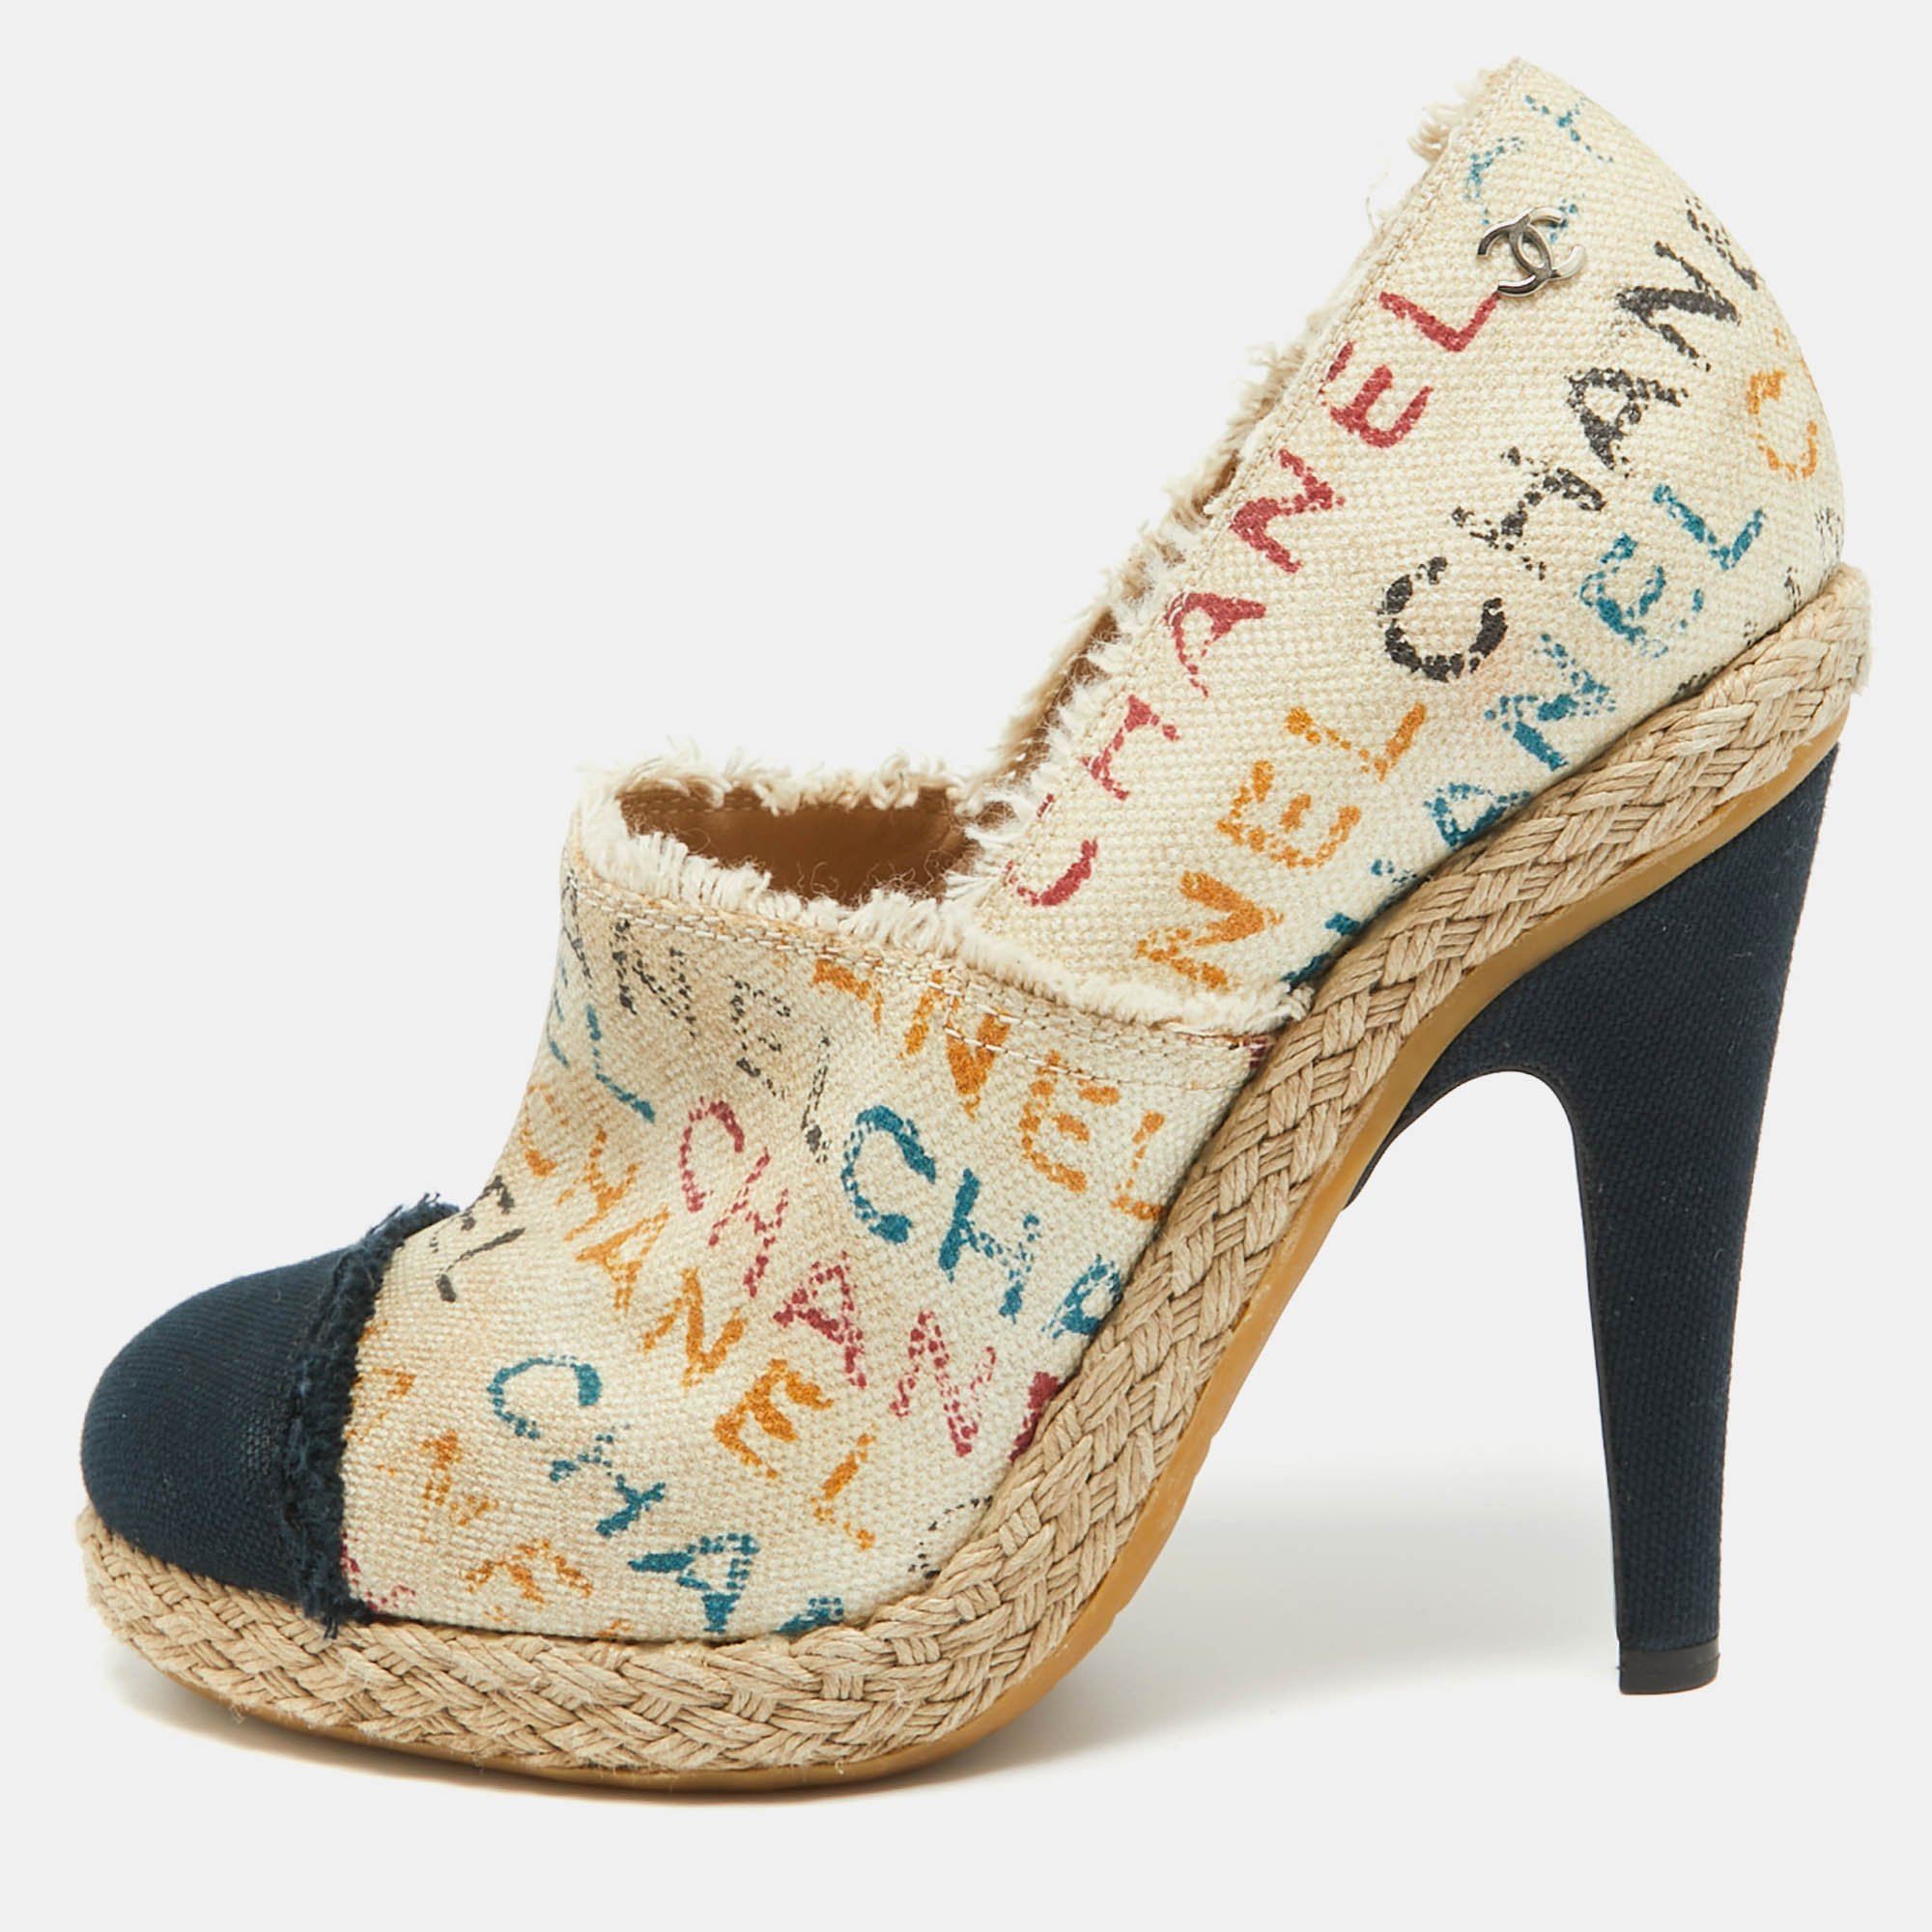 Deliver a signature look with these Chanel espadrille pumps. Crafted meticulously from canvas with chic graffiti detailing on the upper they come in a lovely shade of beige that is contrasted with navy blue cap toes. They are styled with low platforms 11cm heels and rubber soles.